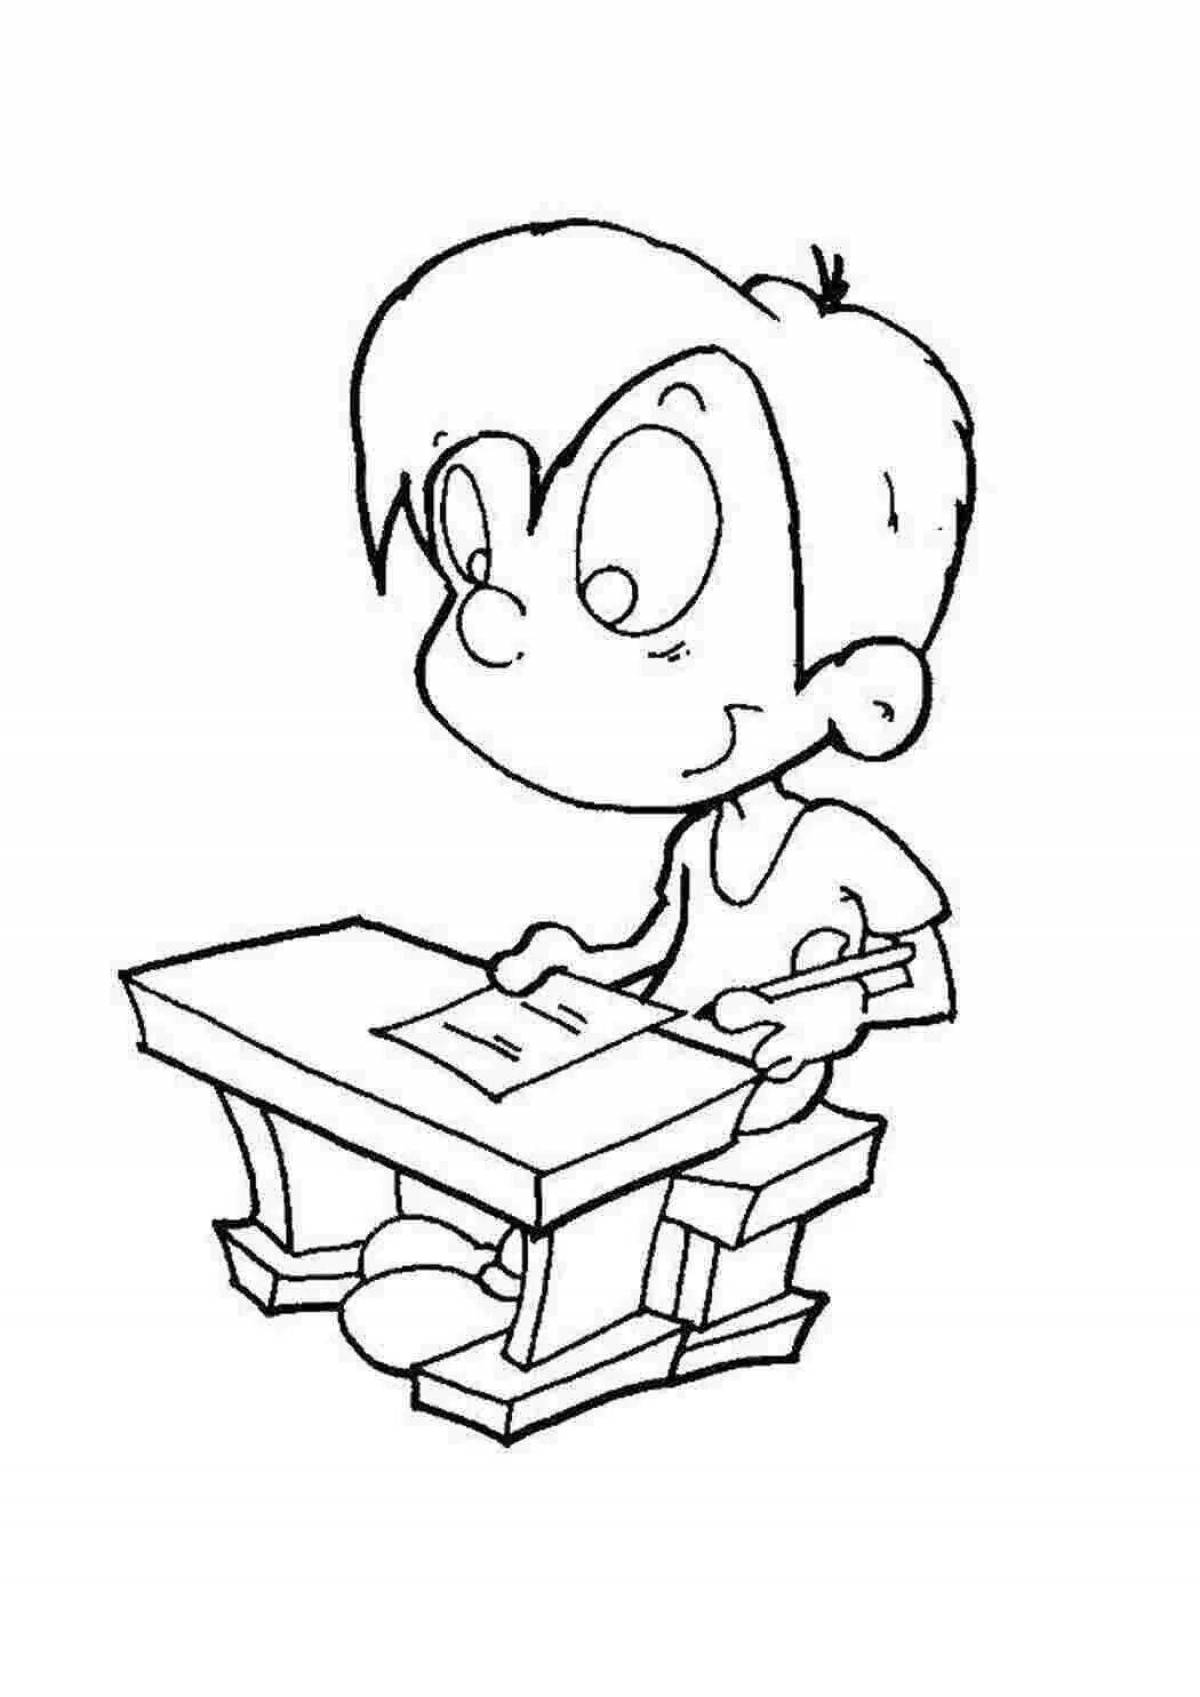 Exciting school desk coloring page